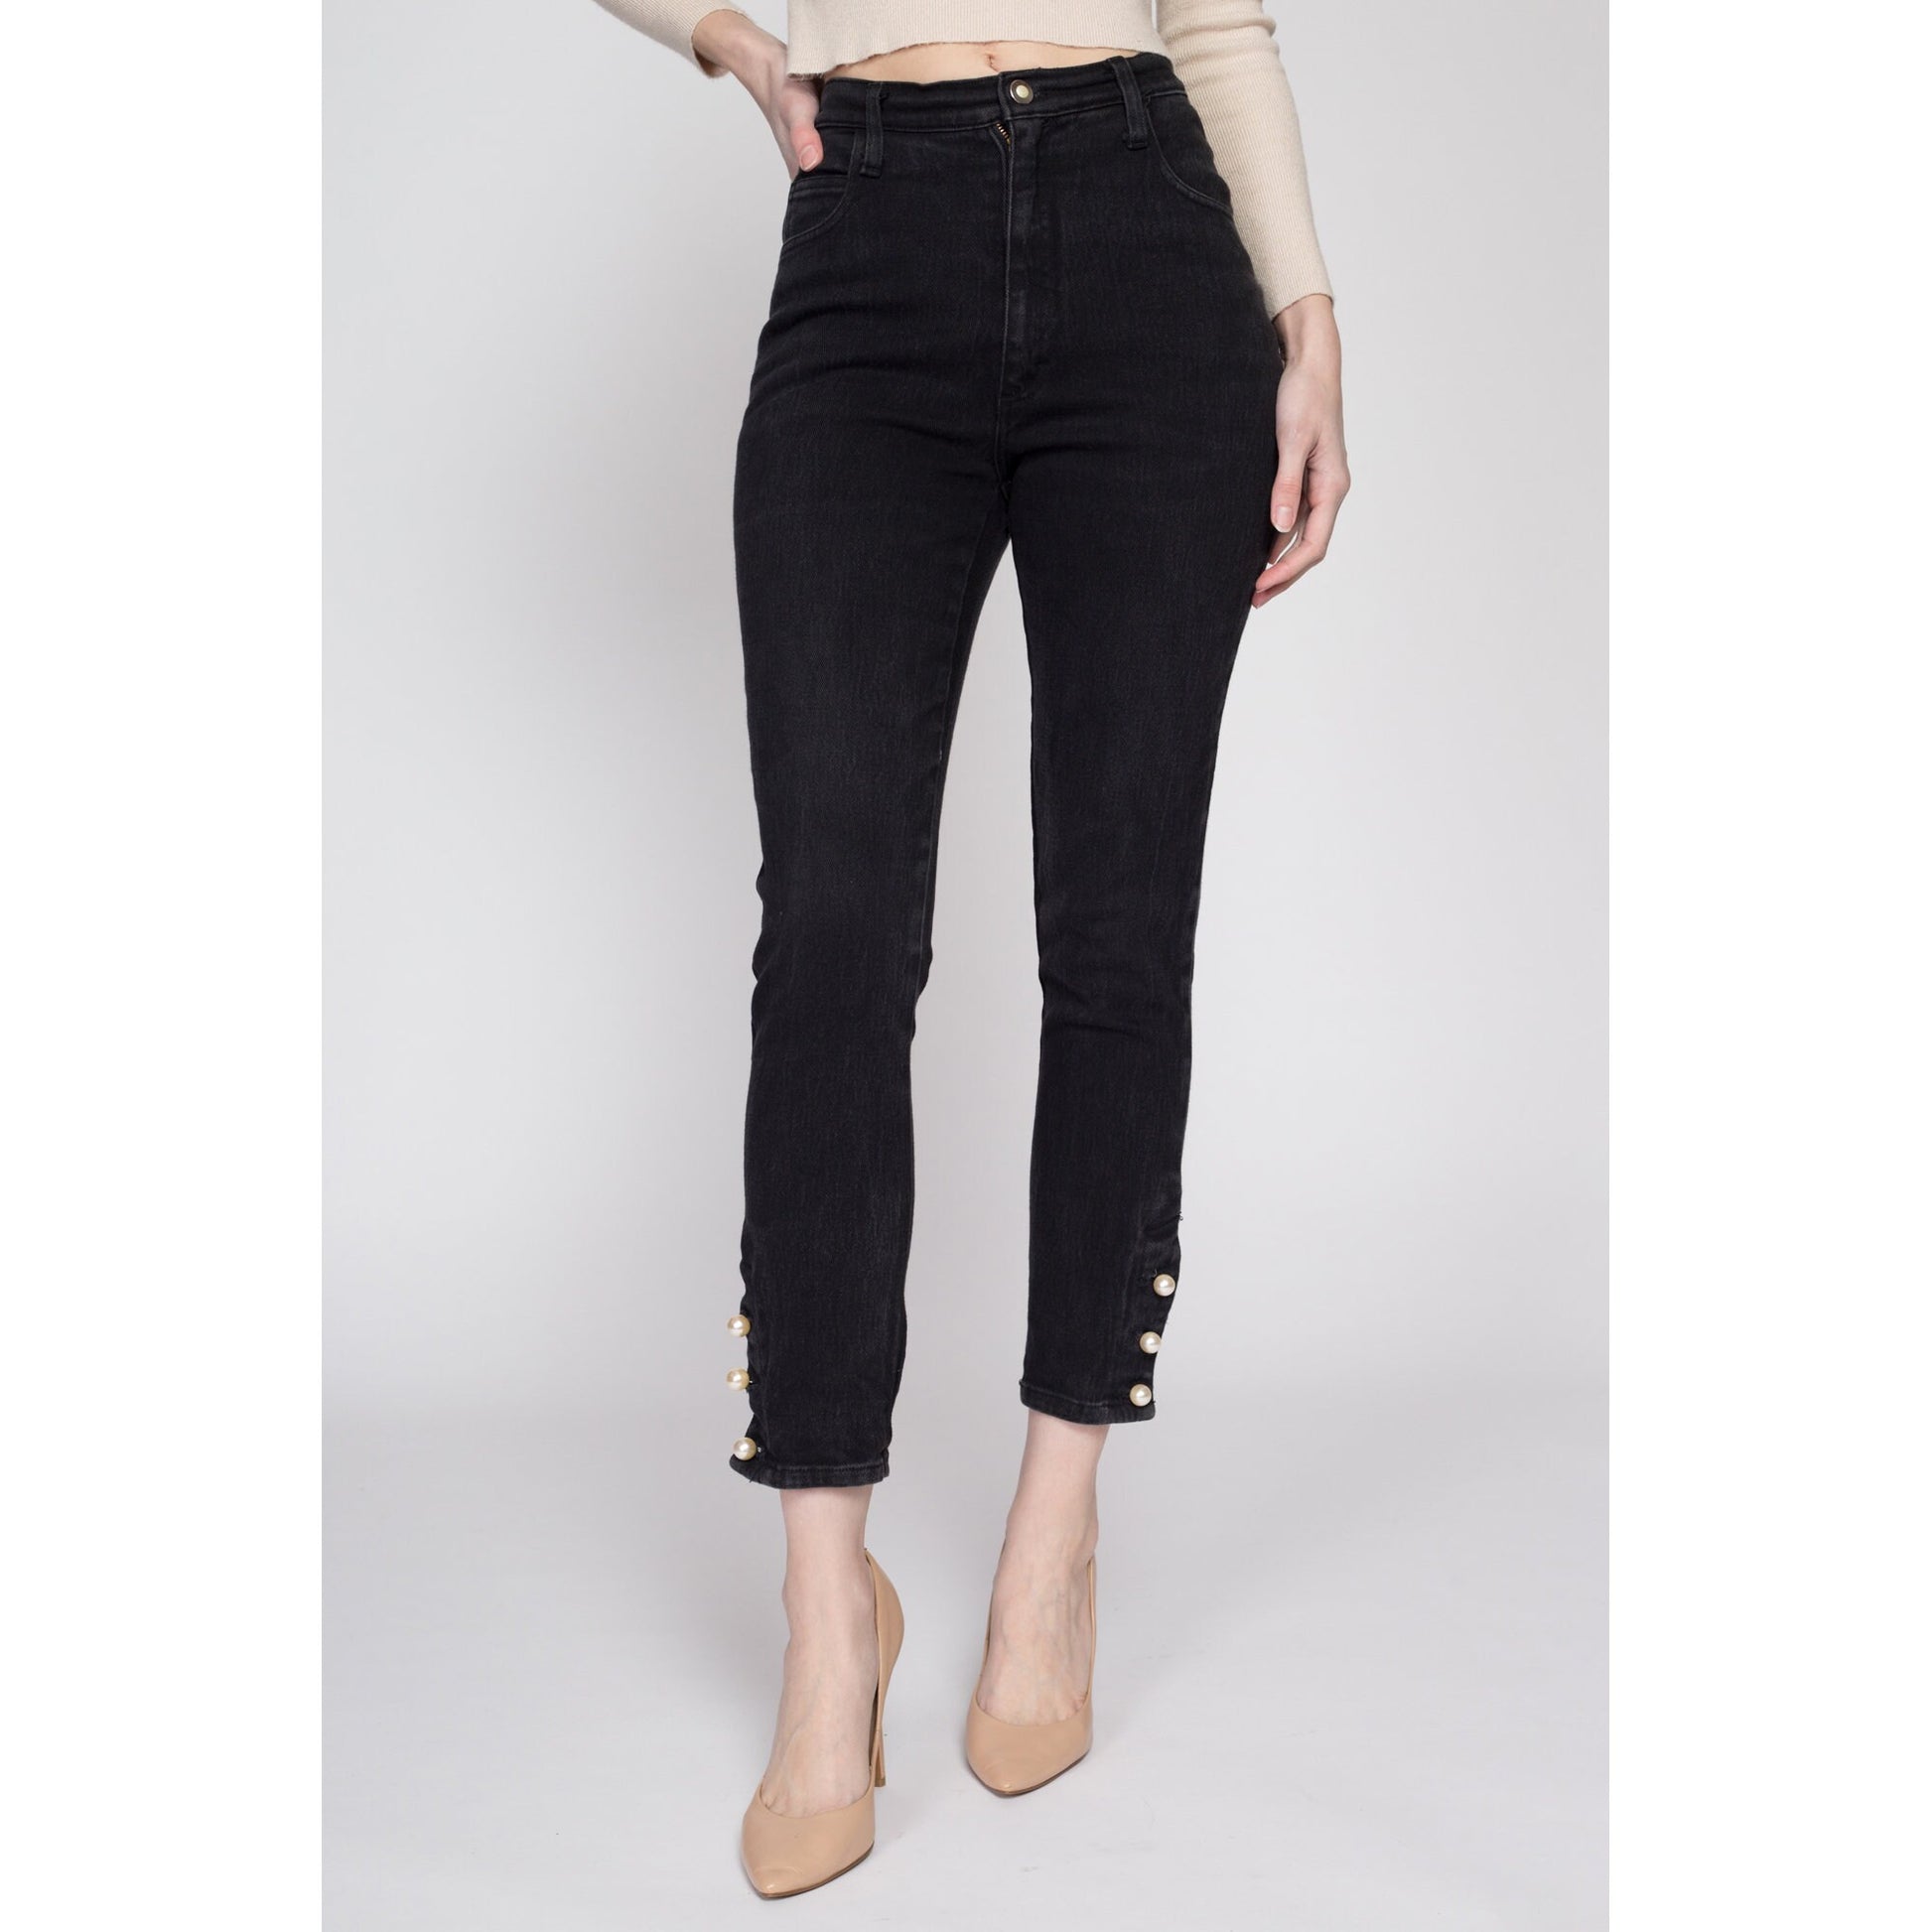 XS 80s Black Ankle Button Skinny Jeans 24"-26" | Vintage Denim High Waisted Stretchy Jeans